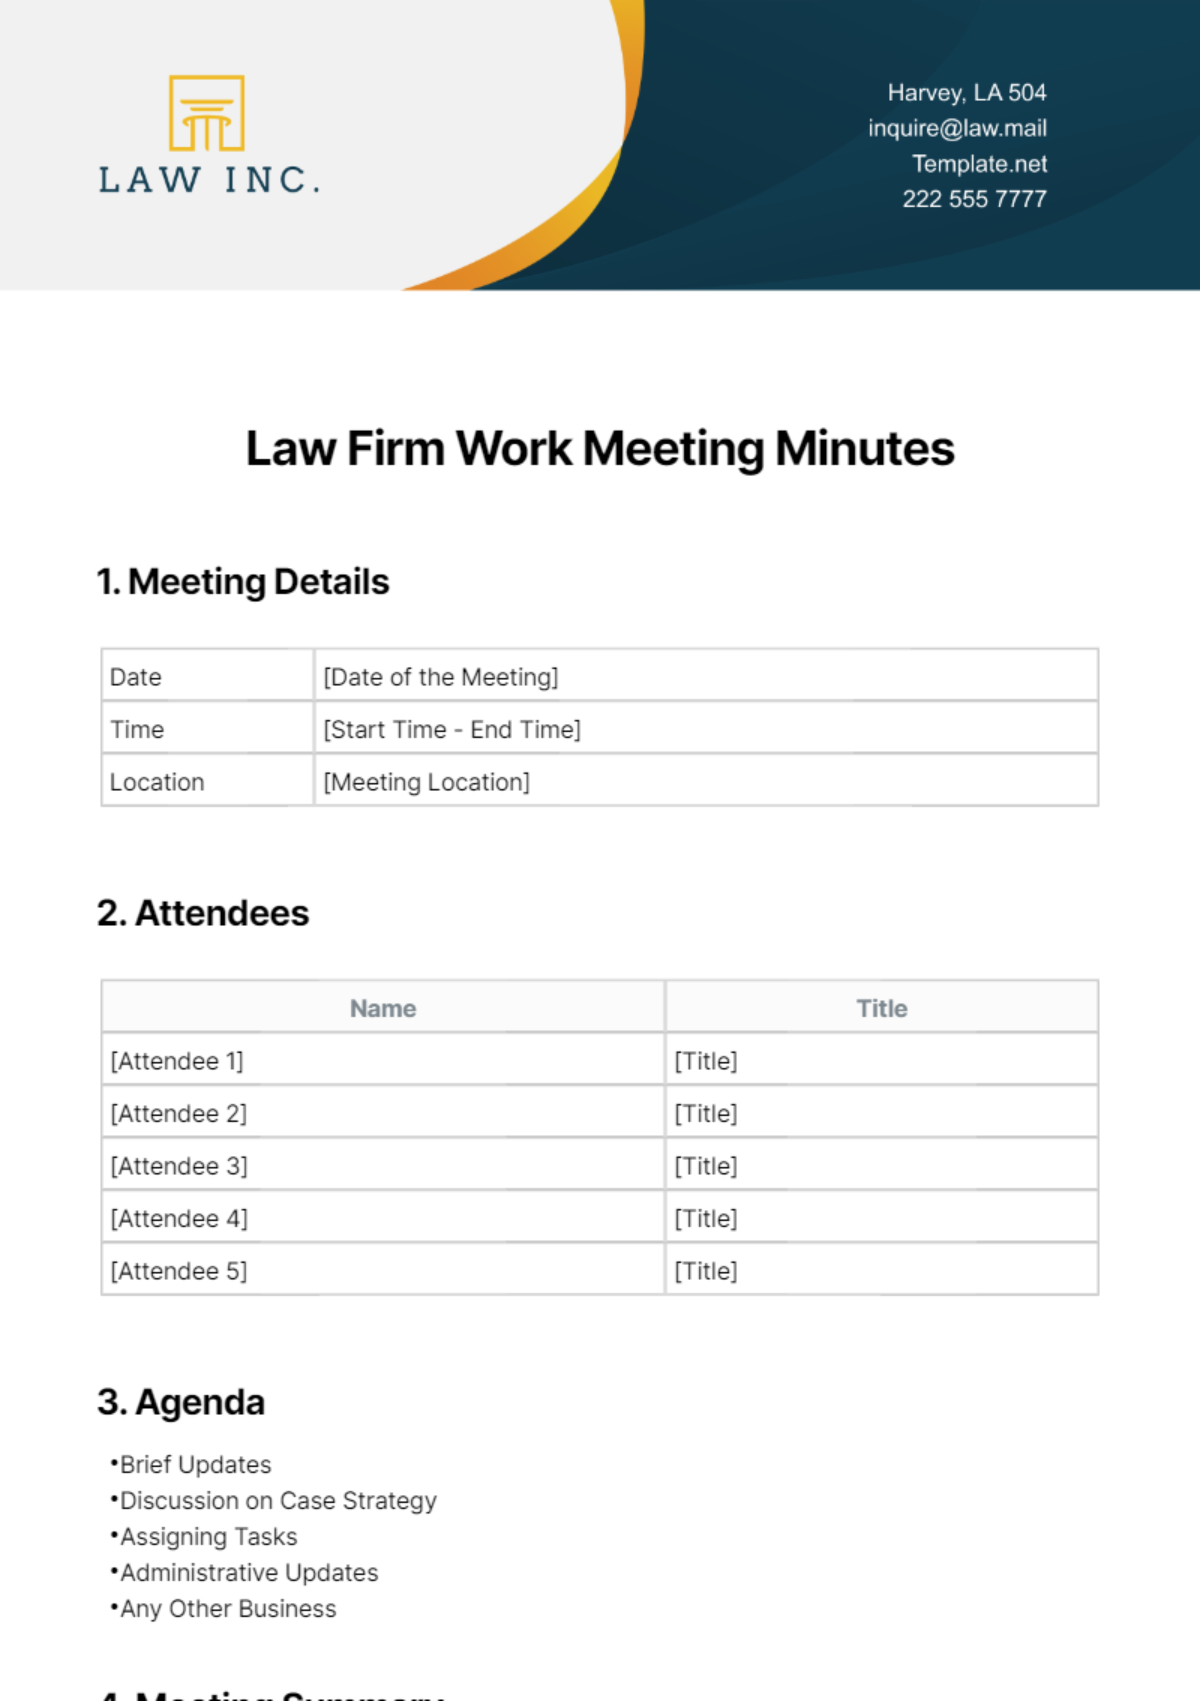 Law Firm Work Meeting Minutes Template